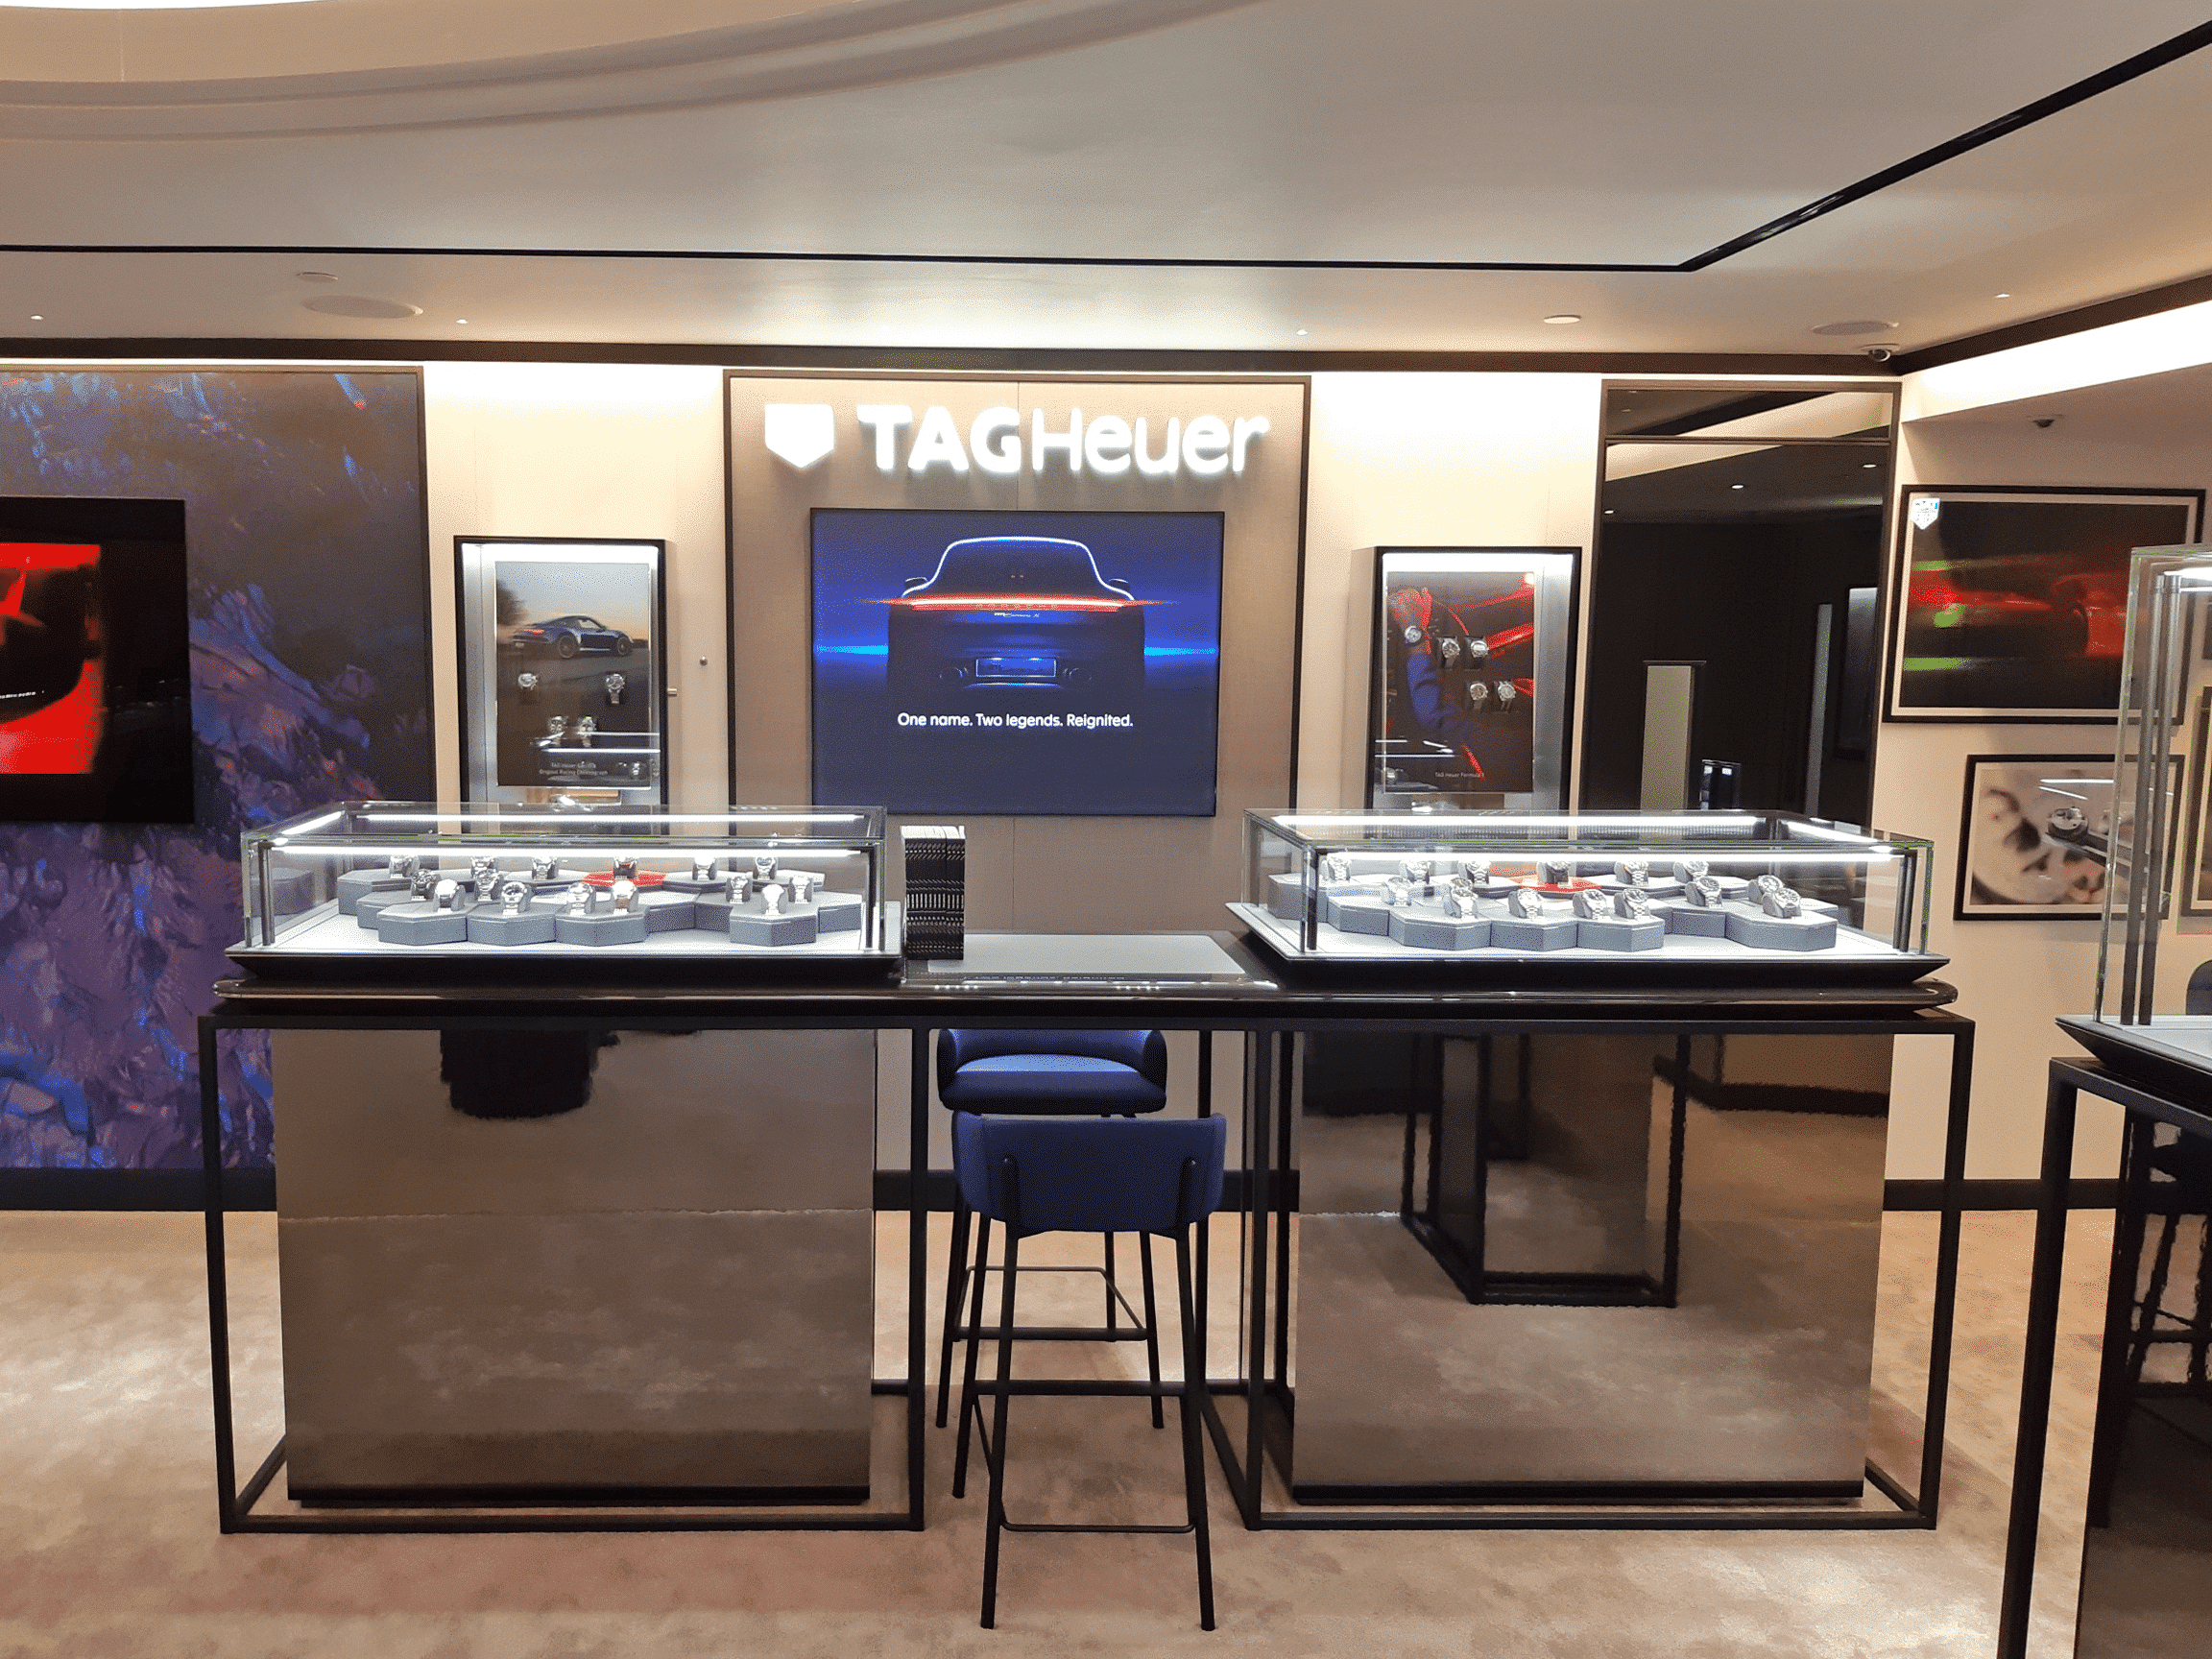 display case for exclusive watches for TAG Heuer shopfitting in Harrods London